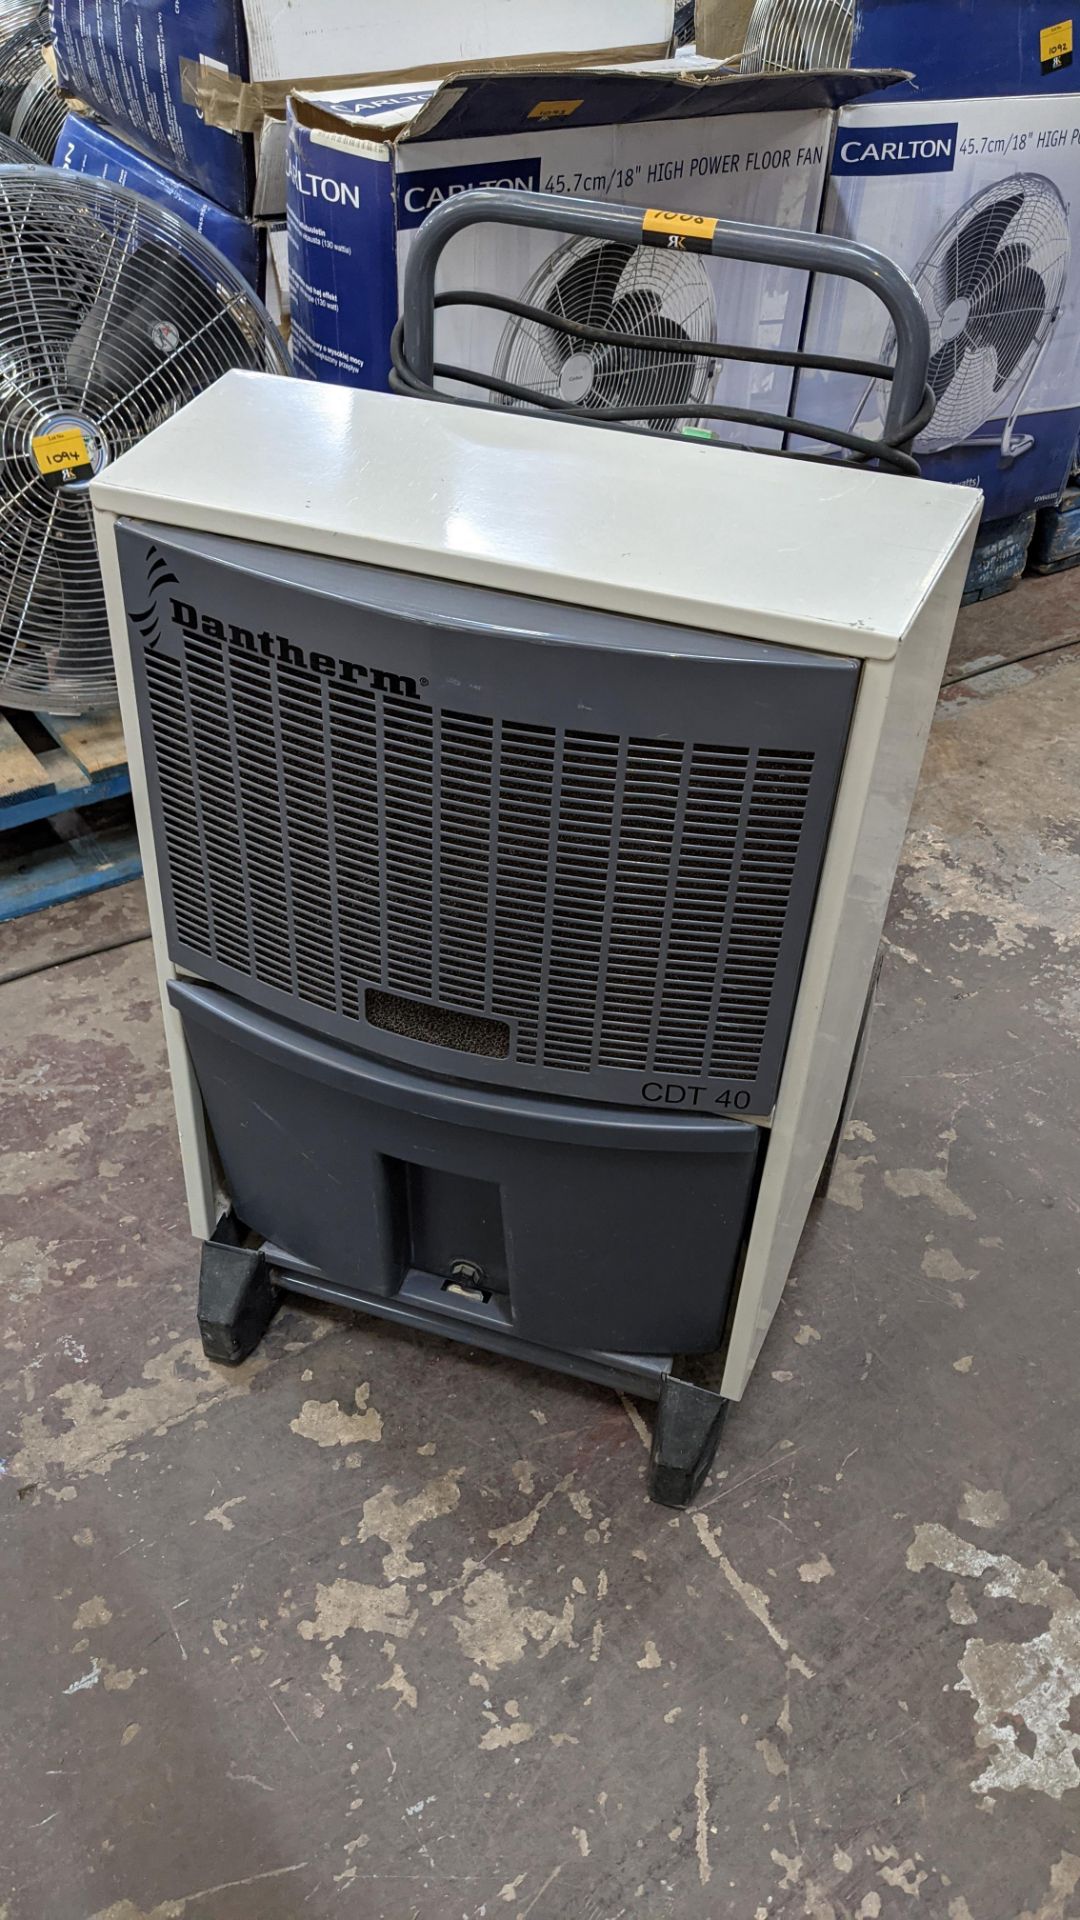 Dantherm model CDT40 dehumidifier. 11,783 recorded hours - Image 4 of 12